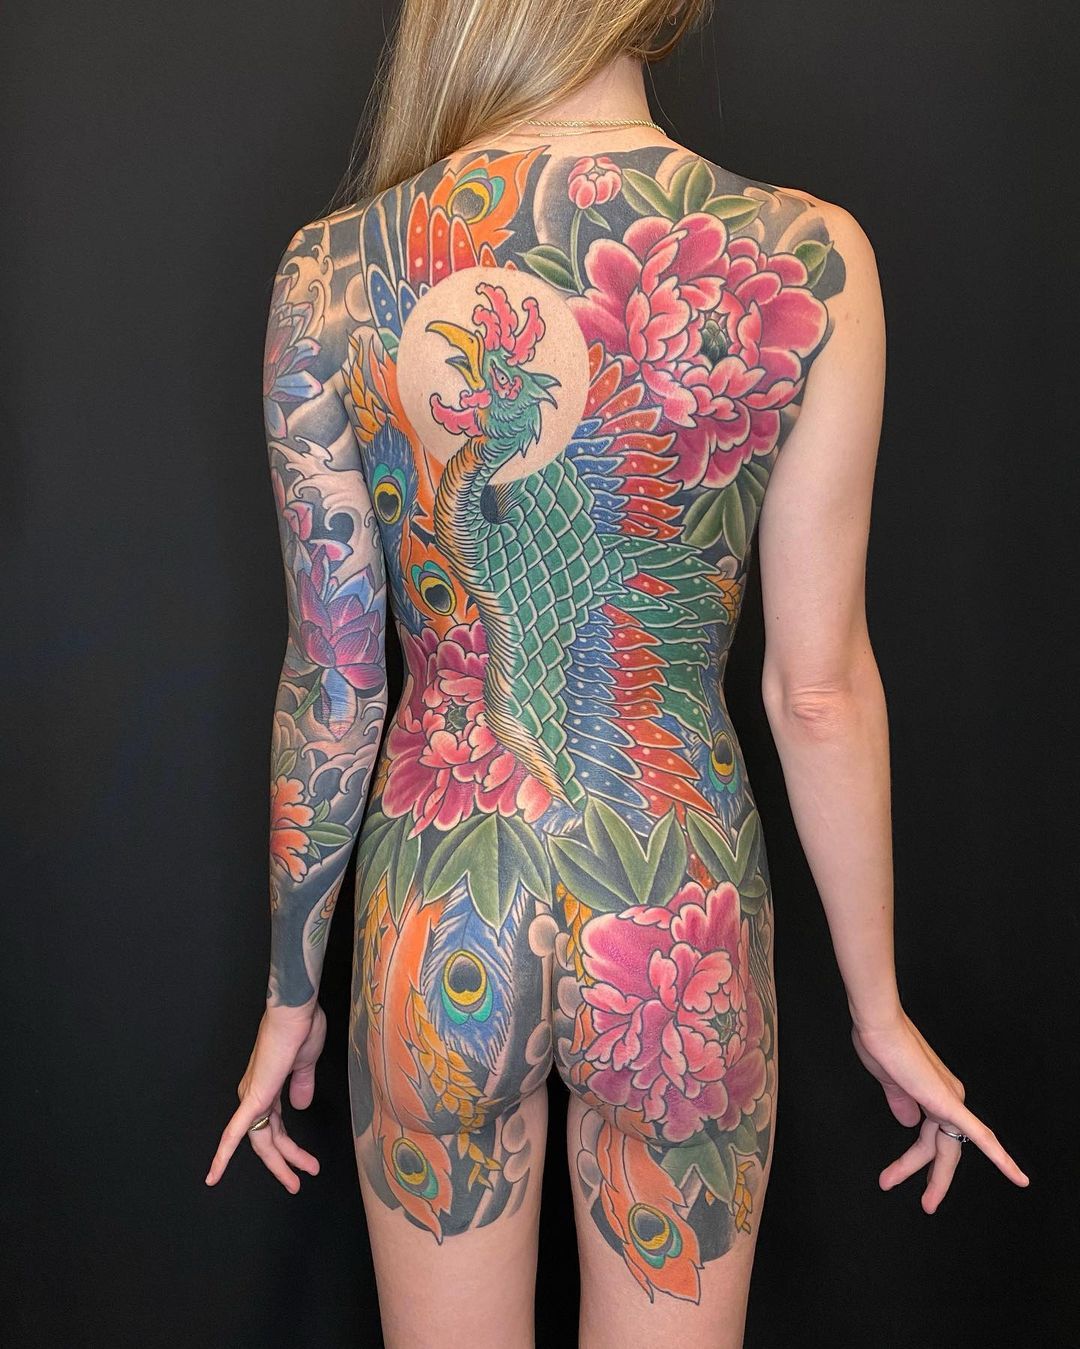 London UK 24th September 2017 A man with a Japanese style body suit  tattoo before shading and colouring has been completed at the 13th London  International Tattoo Convention which took place over